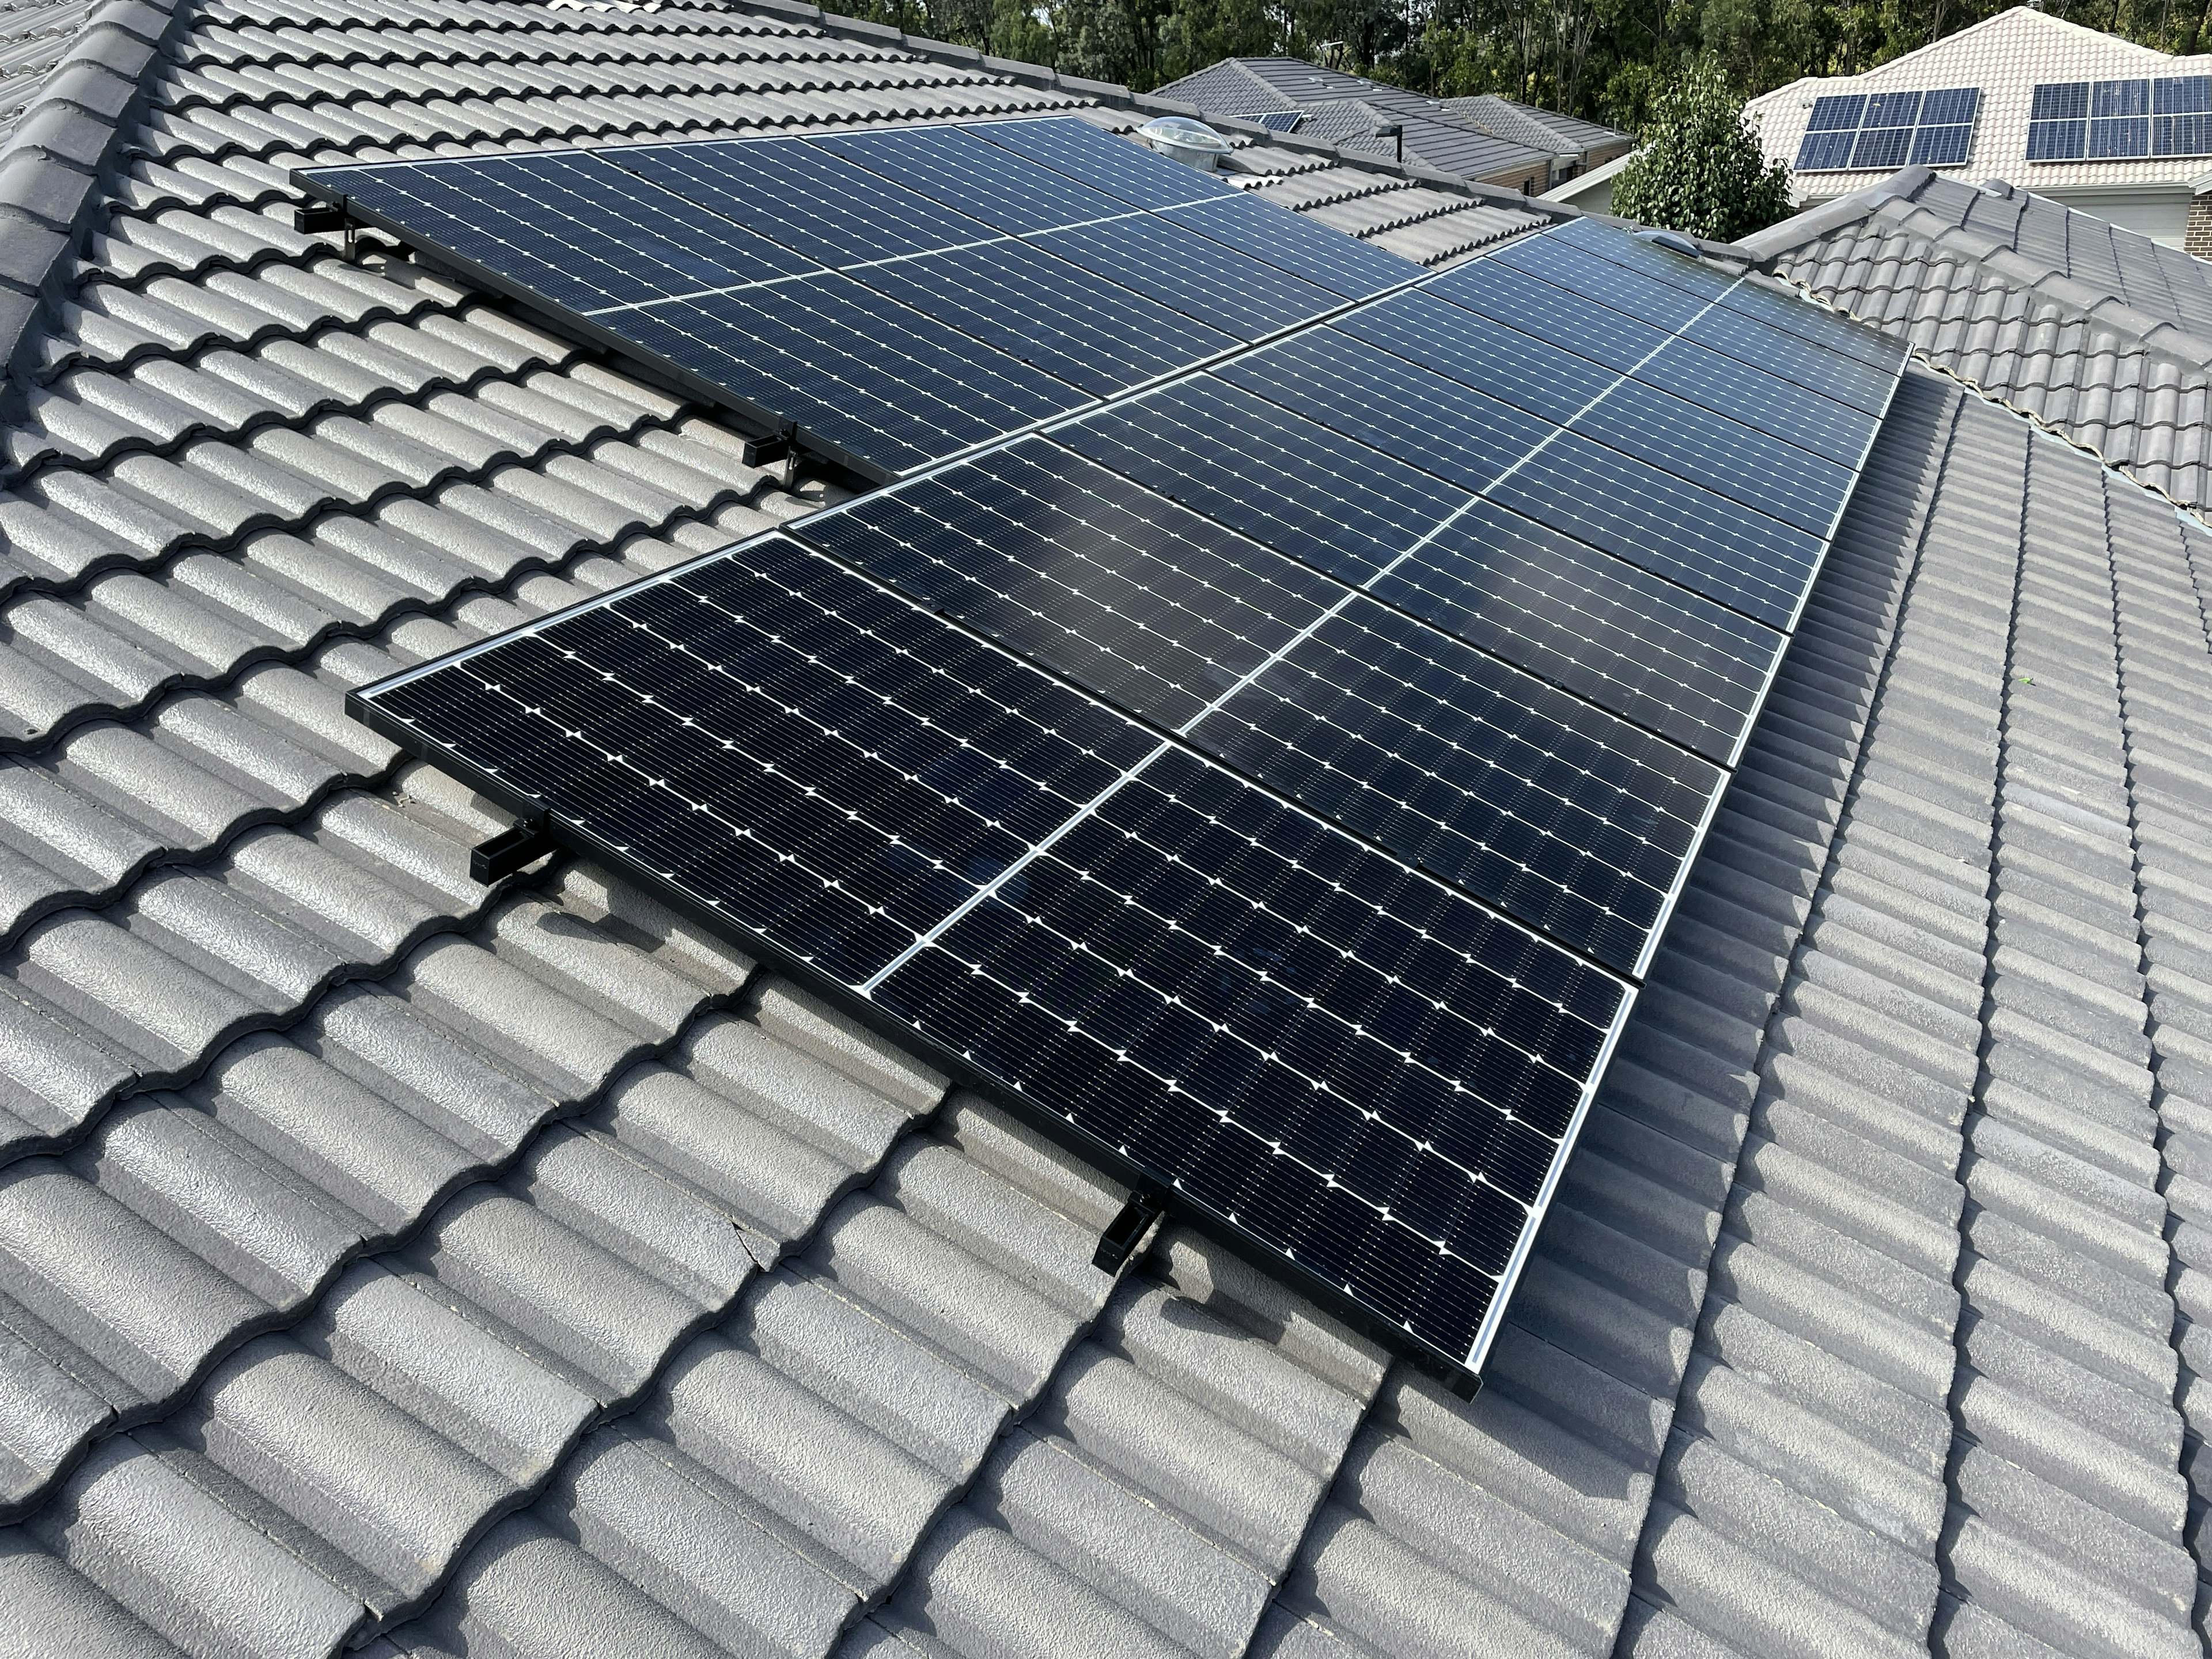 5kW solar panel system installed on a roof